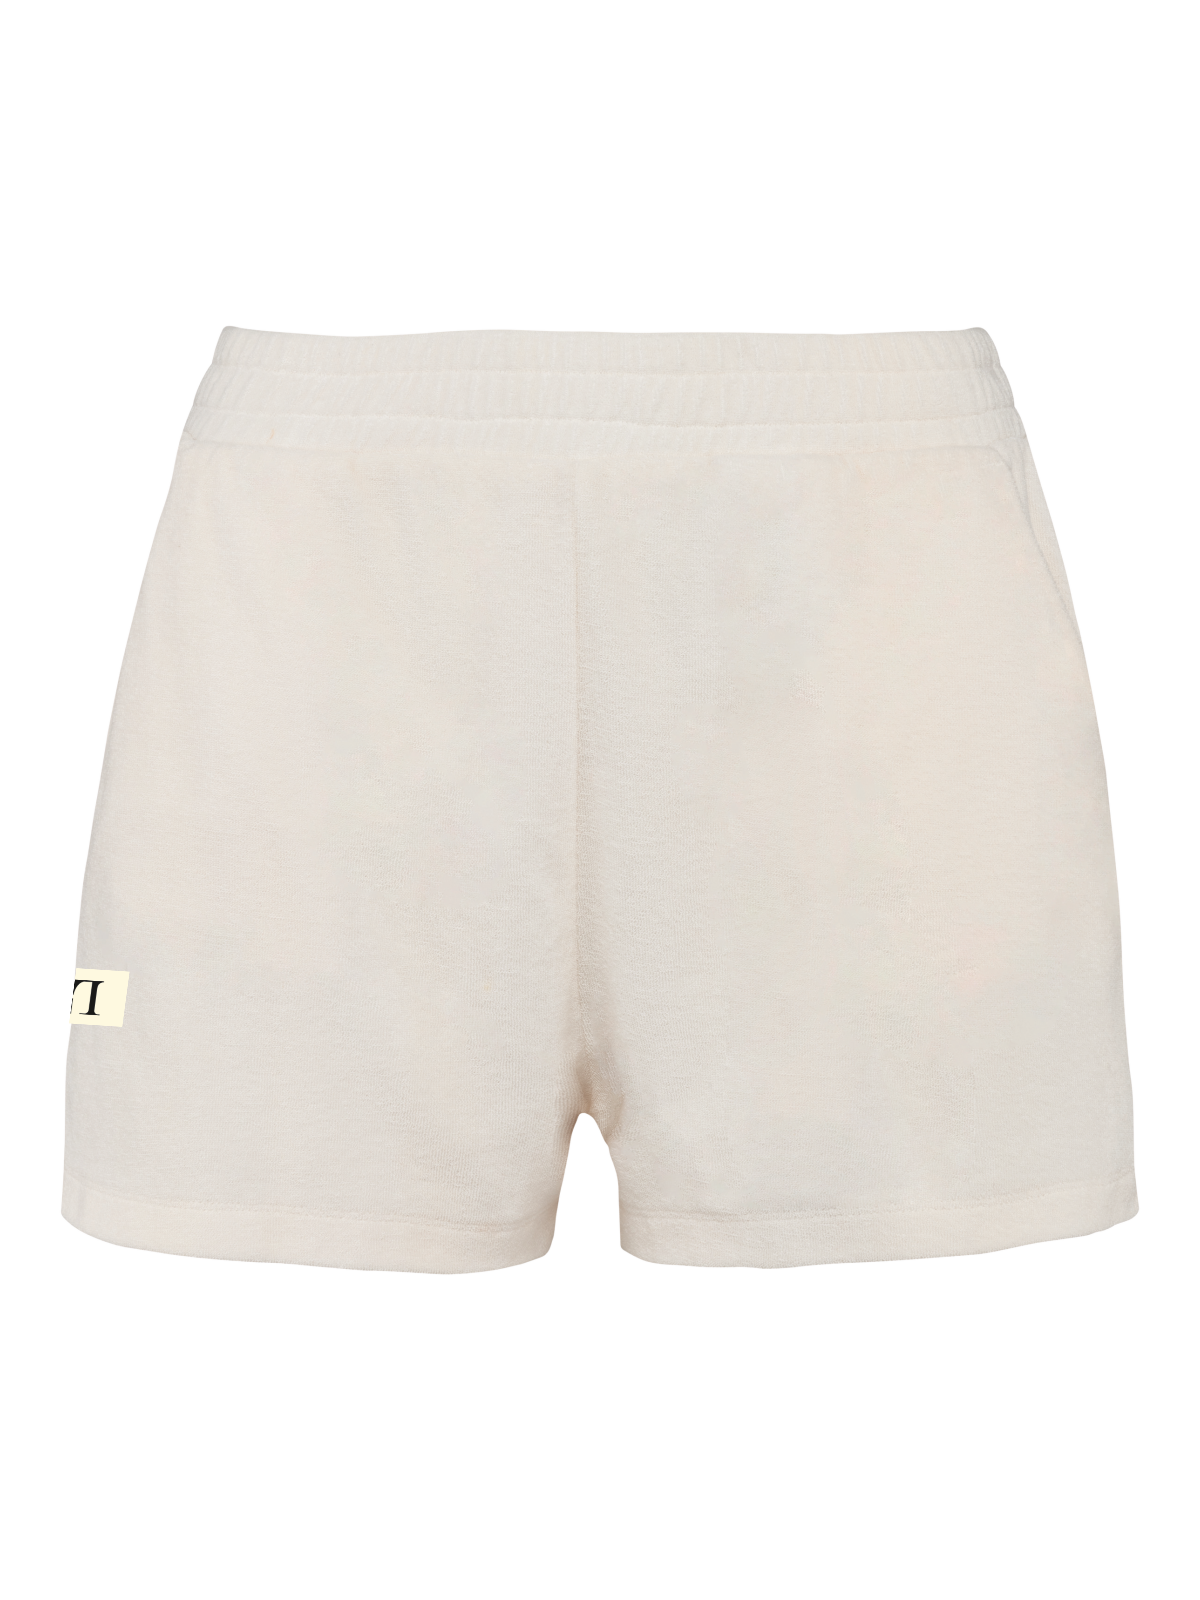 LL Terry Towel Shorts ivory